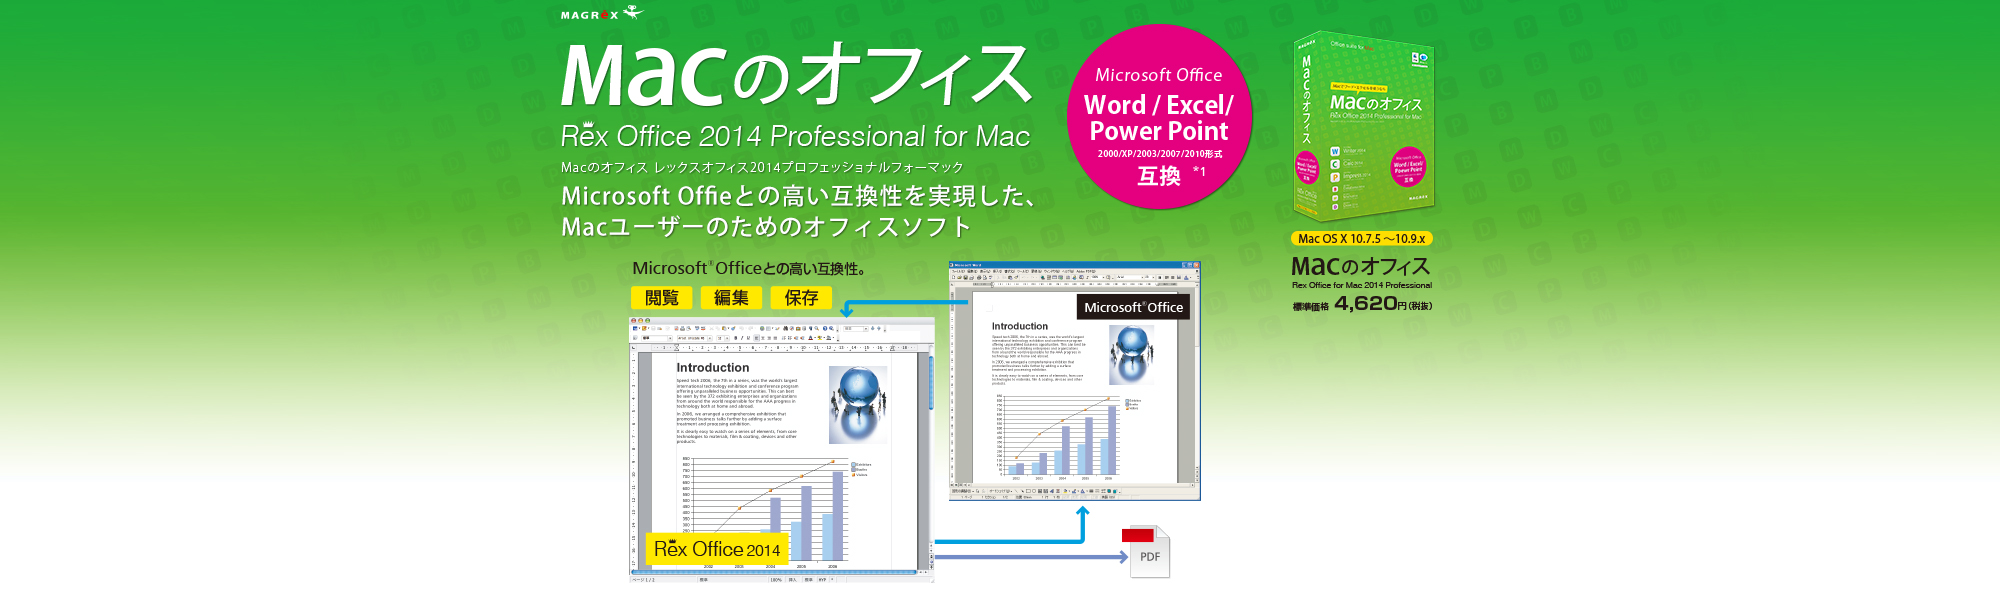 Mac桼ΤΥեեȡ MacΥե Rex Office 2014Professional for Mac